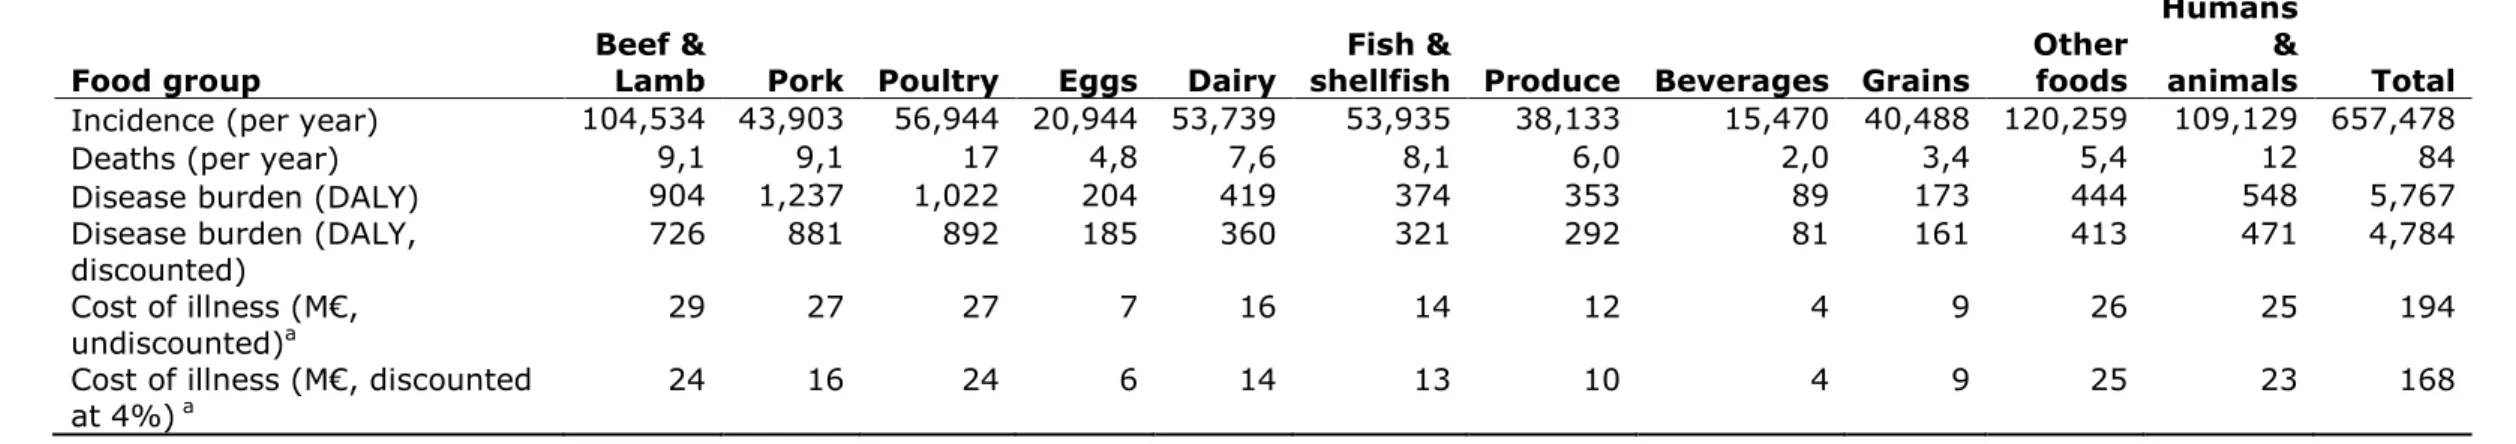 Table 10. Attribution of the incidence, fatalities, disease burden and Cost-of-Illness of foodborne disease *  to food groups in the  Netherlands, 2015 